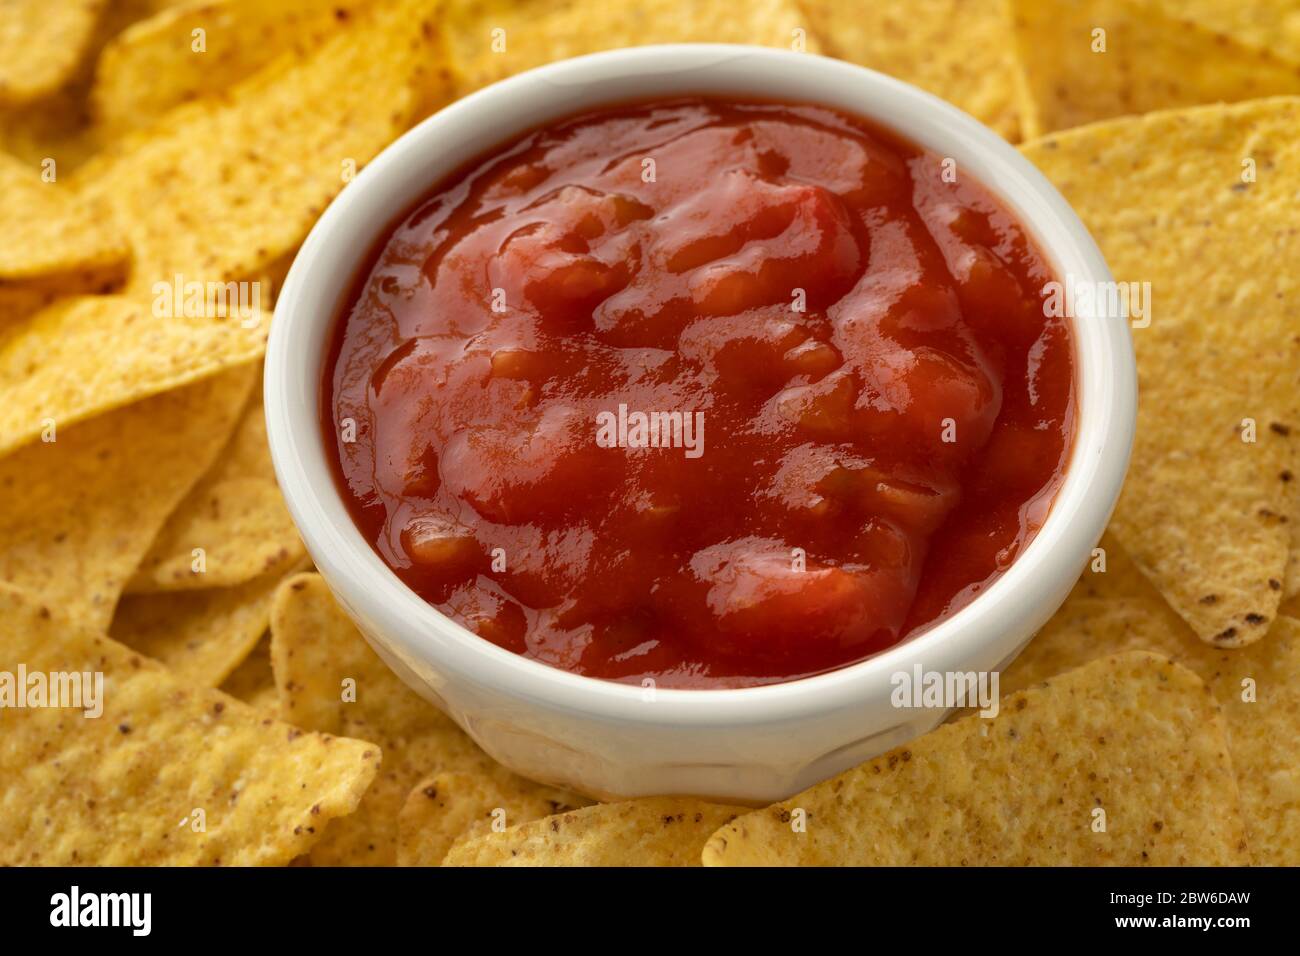 Bowl of red spicy mexican salsa surrounded by tortilla chips Stock Photo